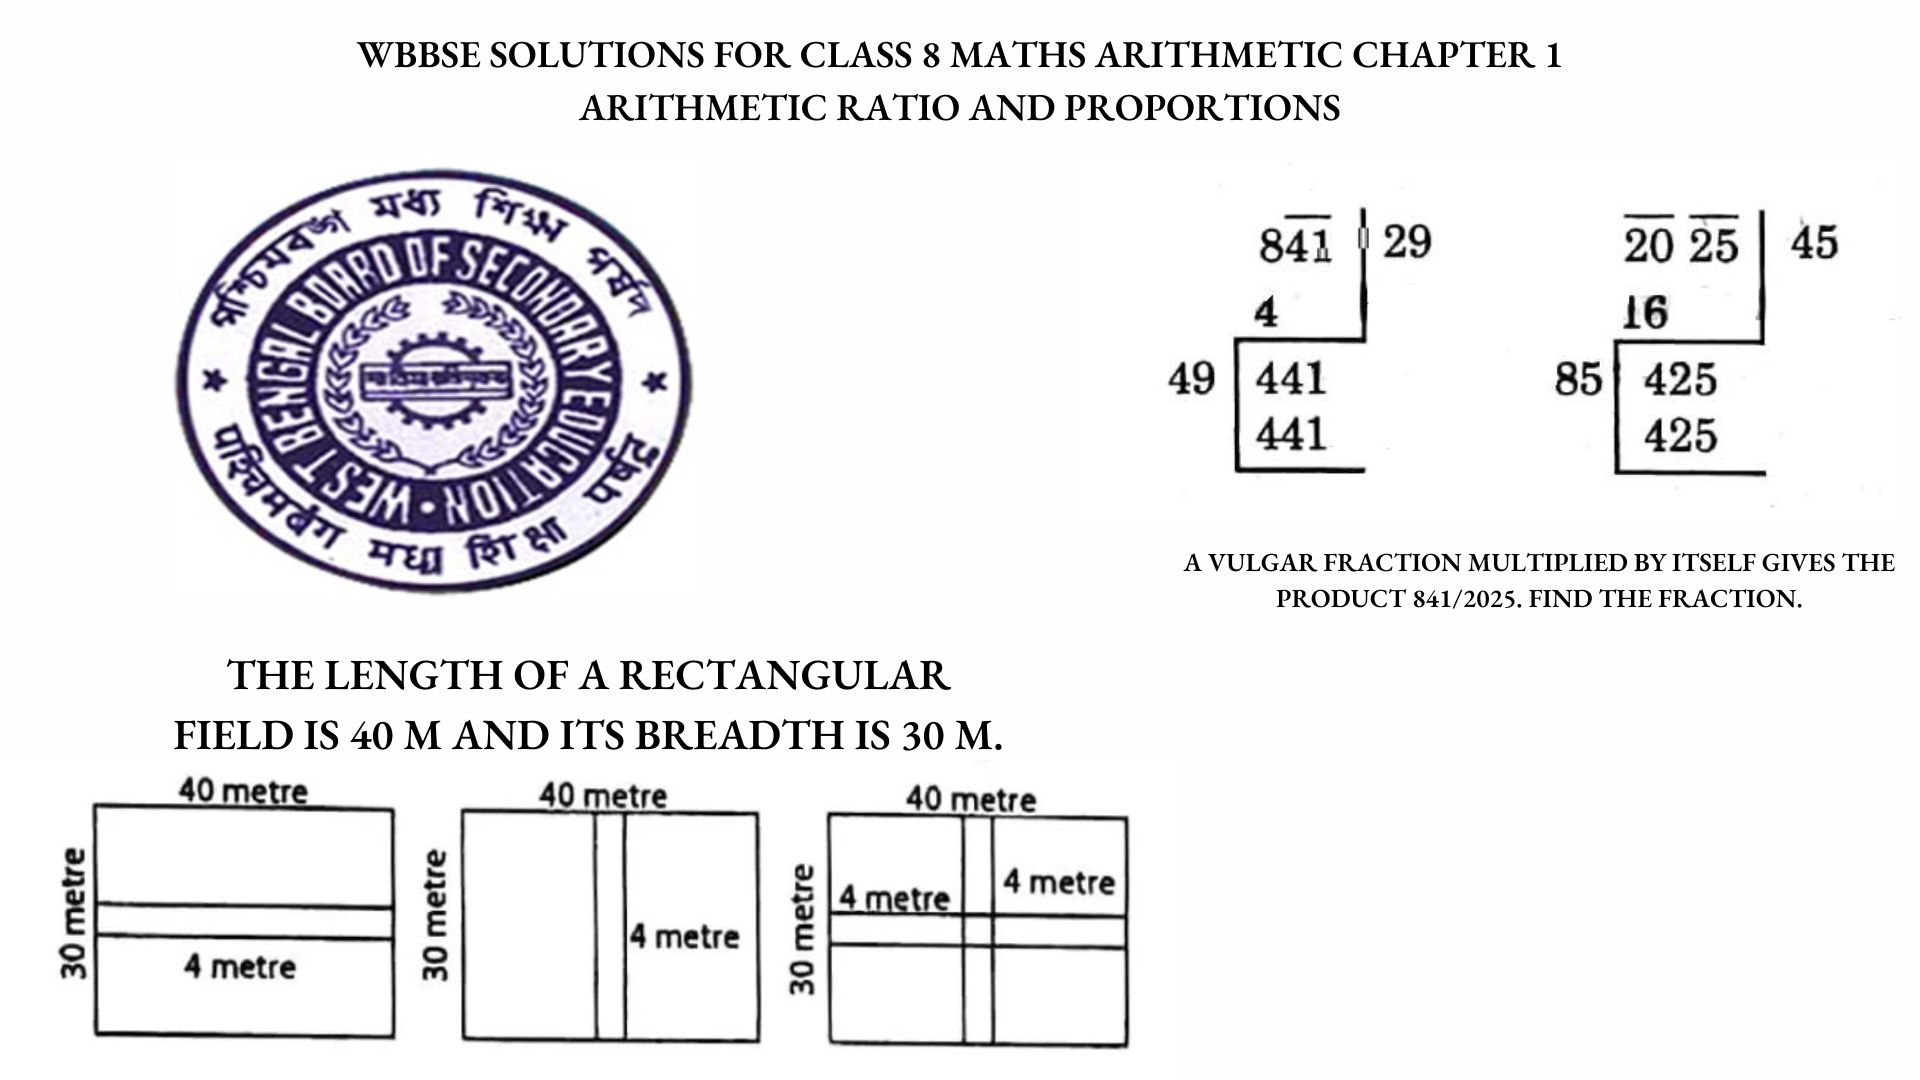 WBBSE Solutions For Class 8 Maths Arithmetic Chapter 1